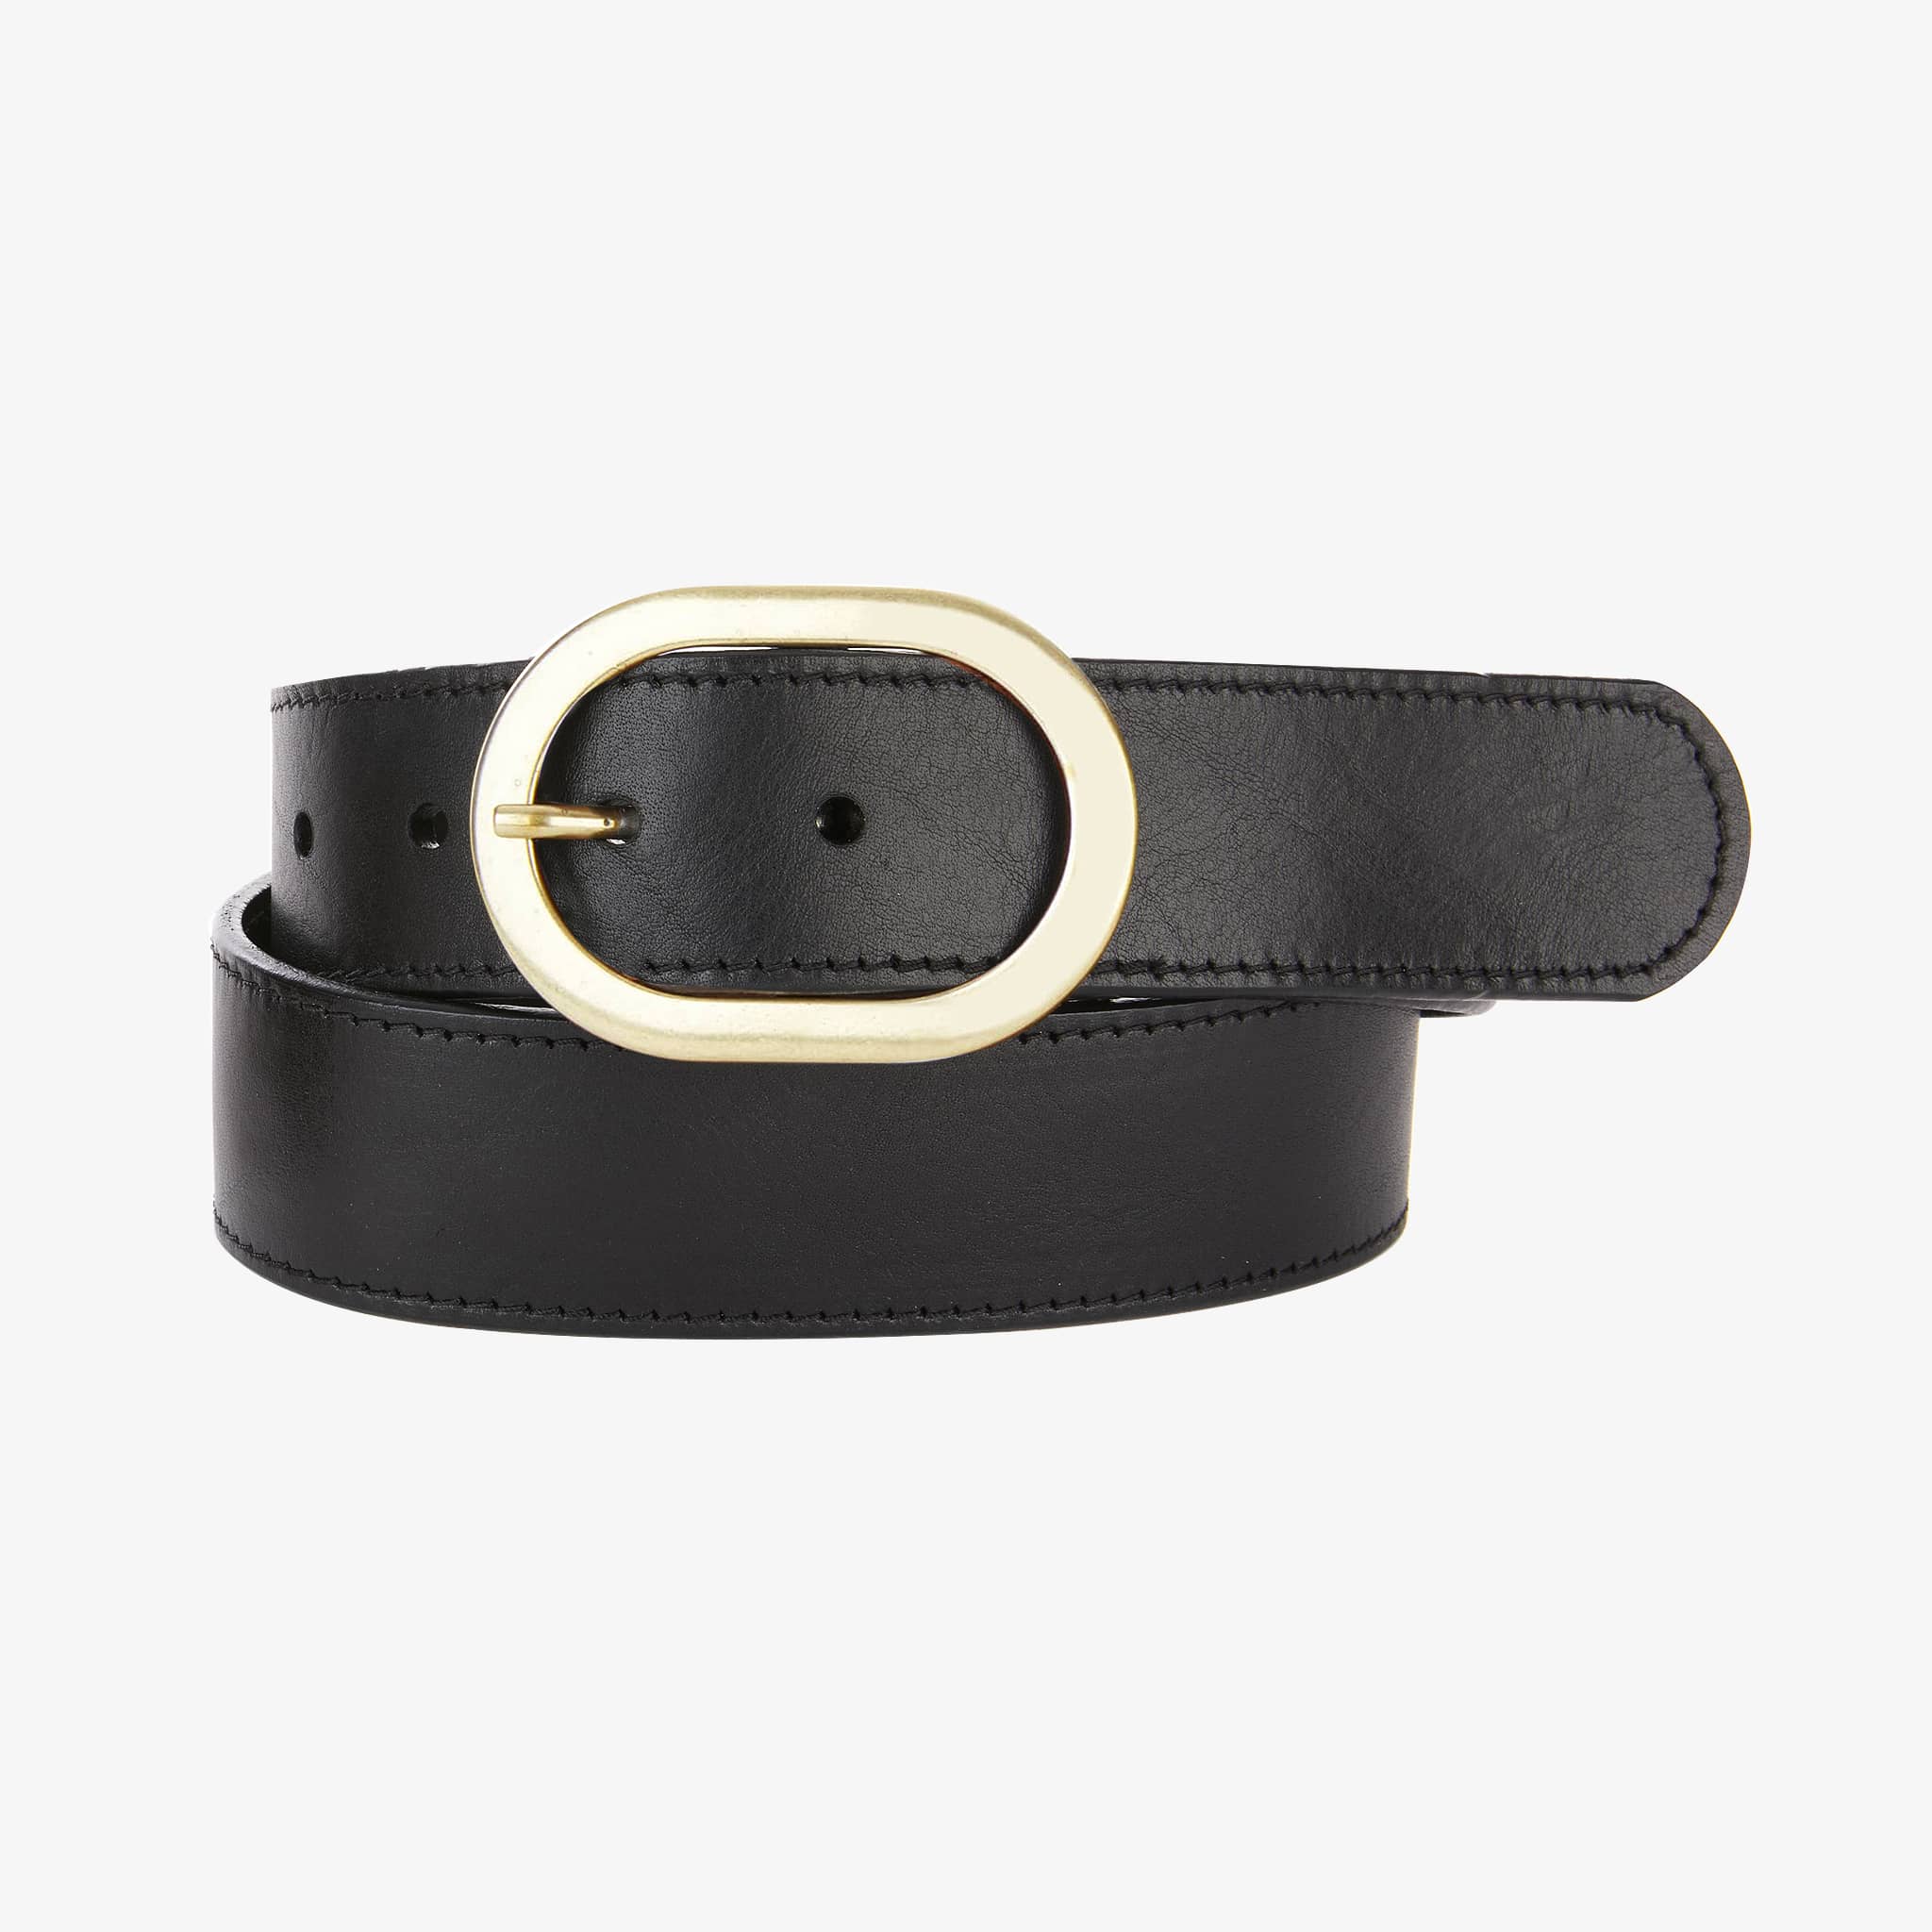 Reese Bridle BRAVE Leather Belt - Custom made for you